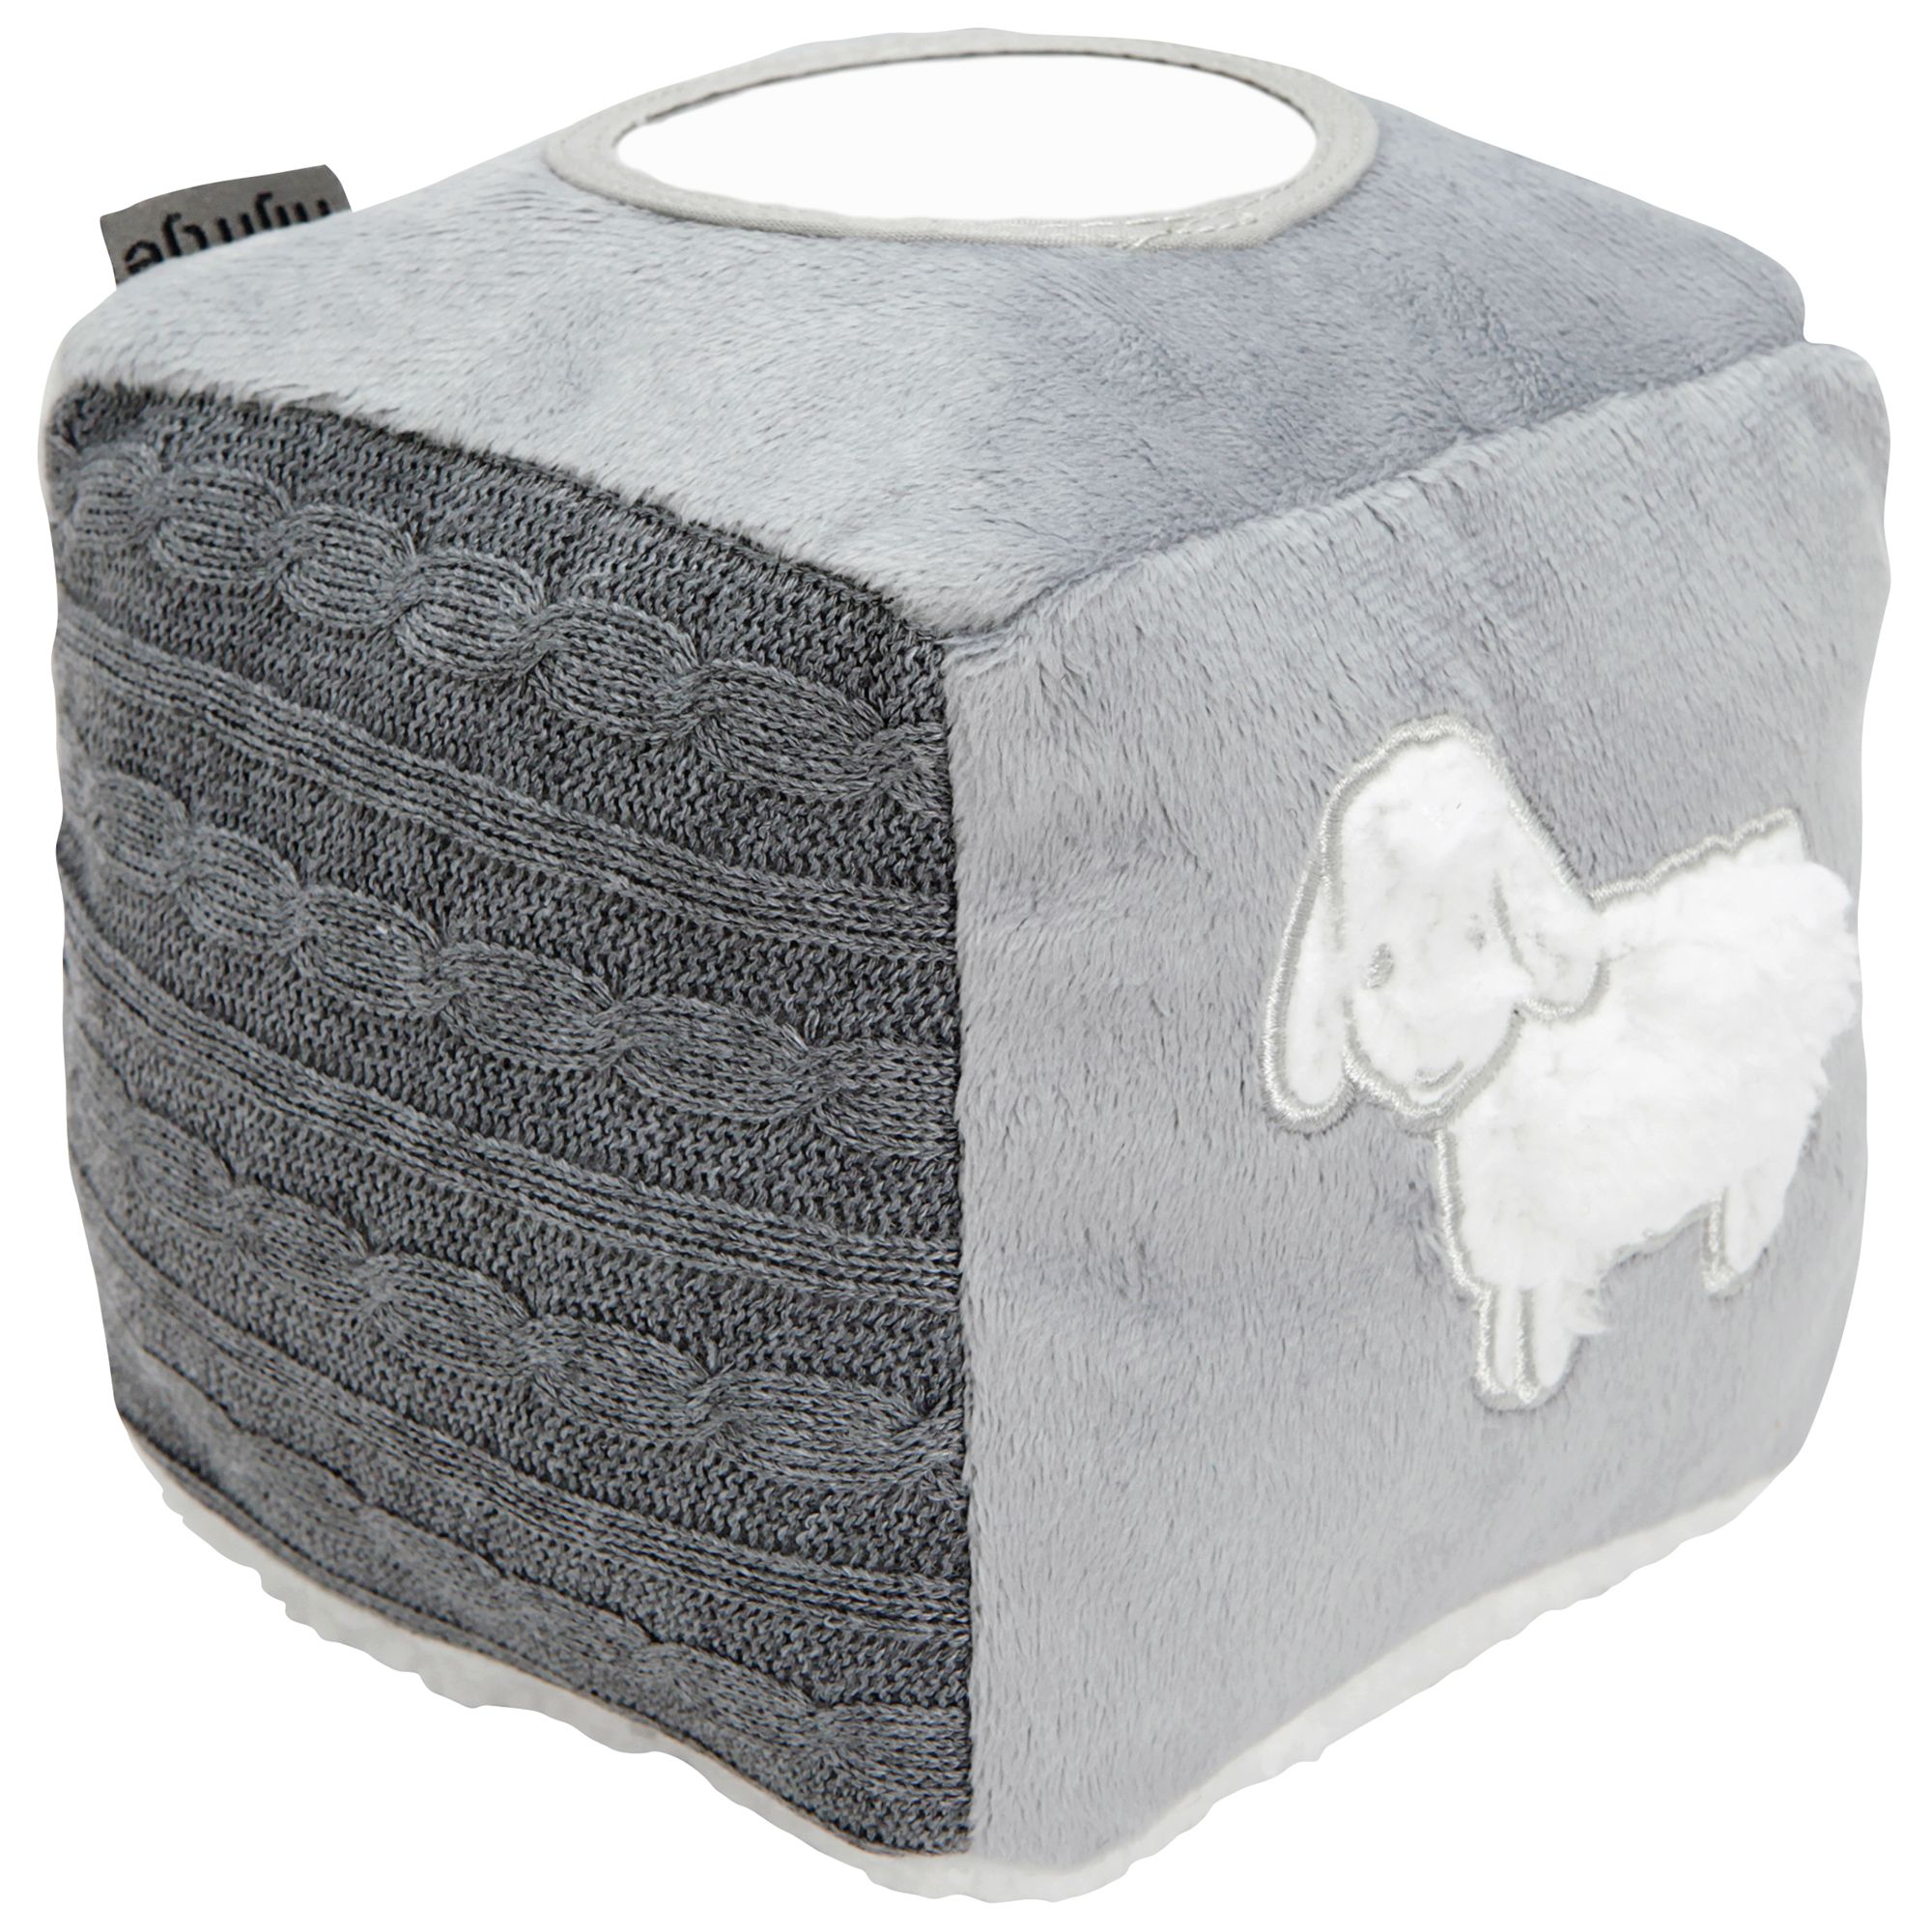 Miffy Knitted Activity Cube, Grey at John Lewis & Partners